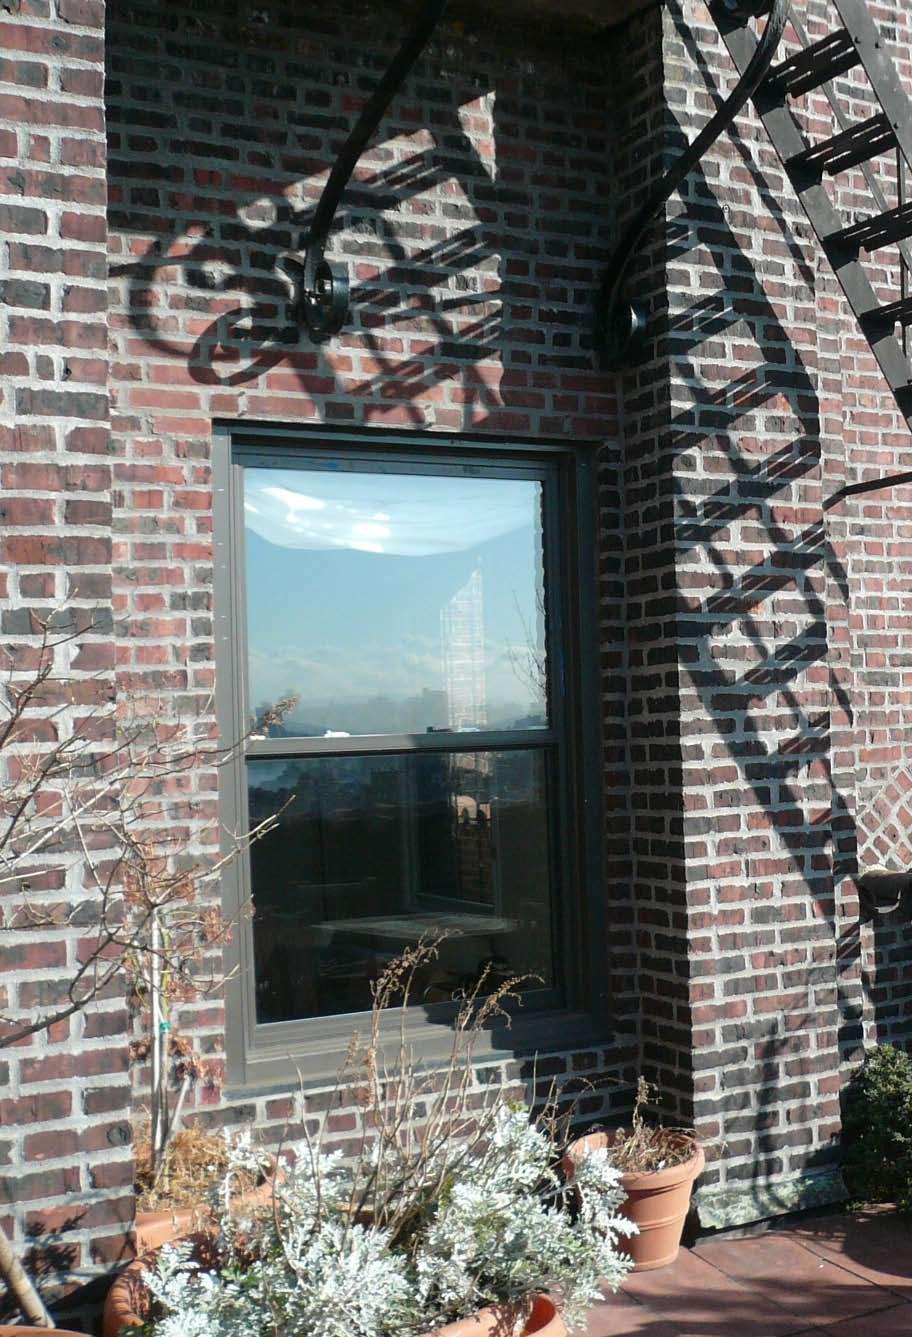 -0 EXISTING STEEL WINDOW (TYPICAL TO 5TH